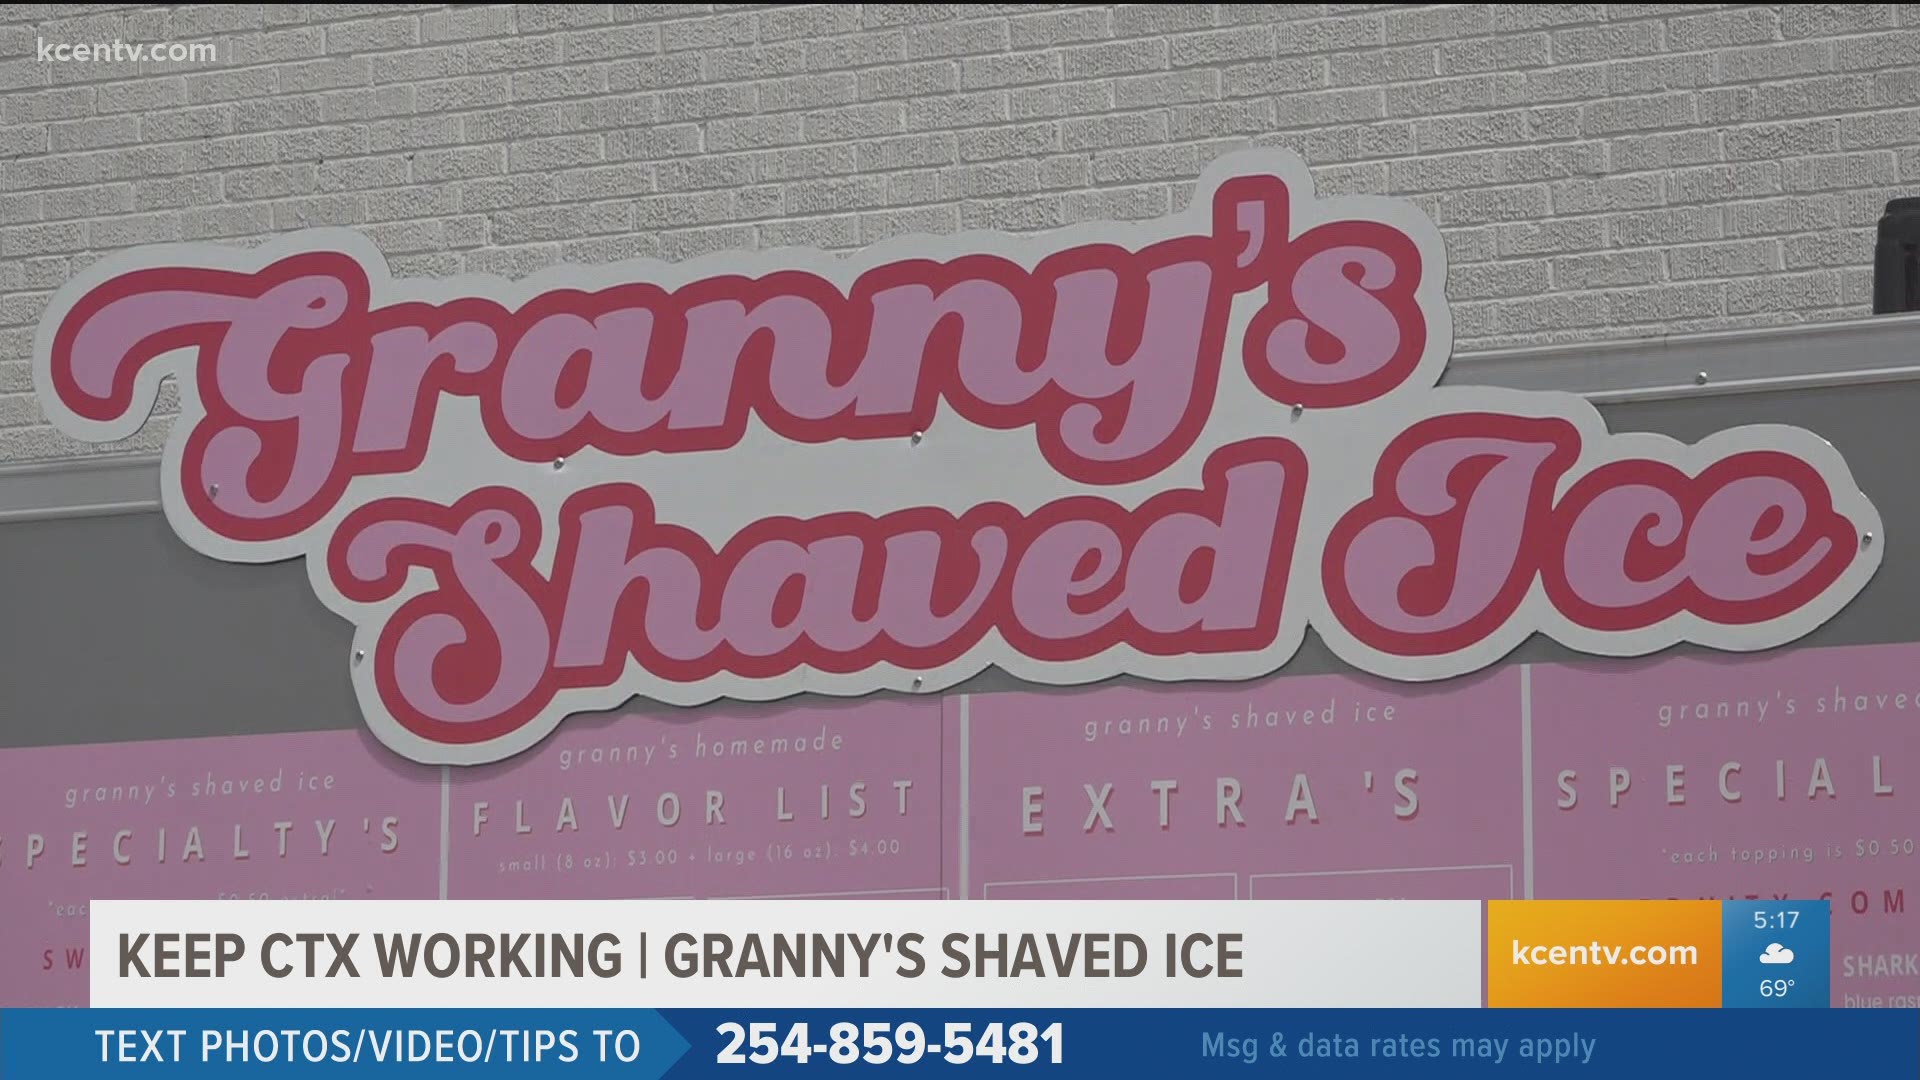 Skylar and Summer Stewart, the owners of Granny's Shaved Ice, started their business as kids, now their opening a permanent location.